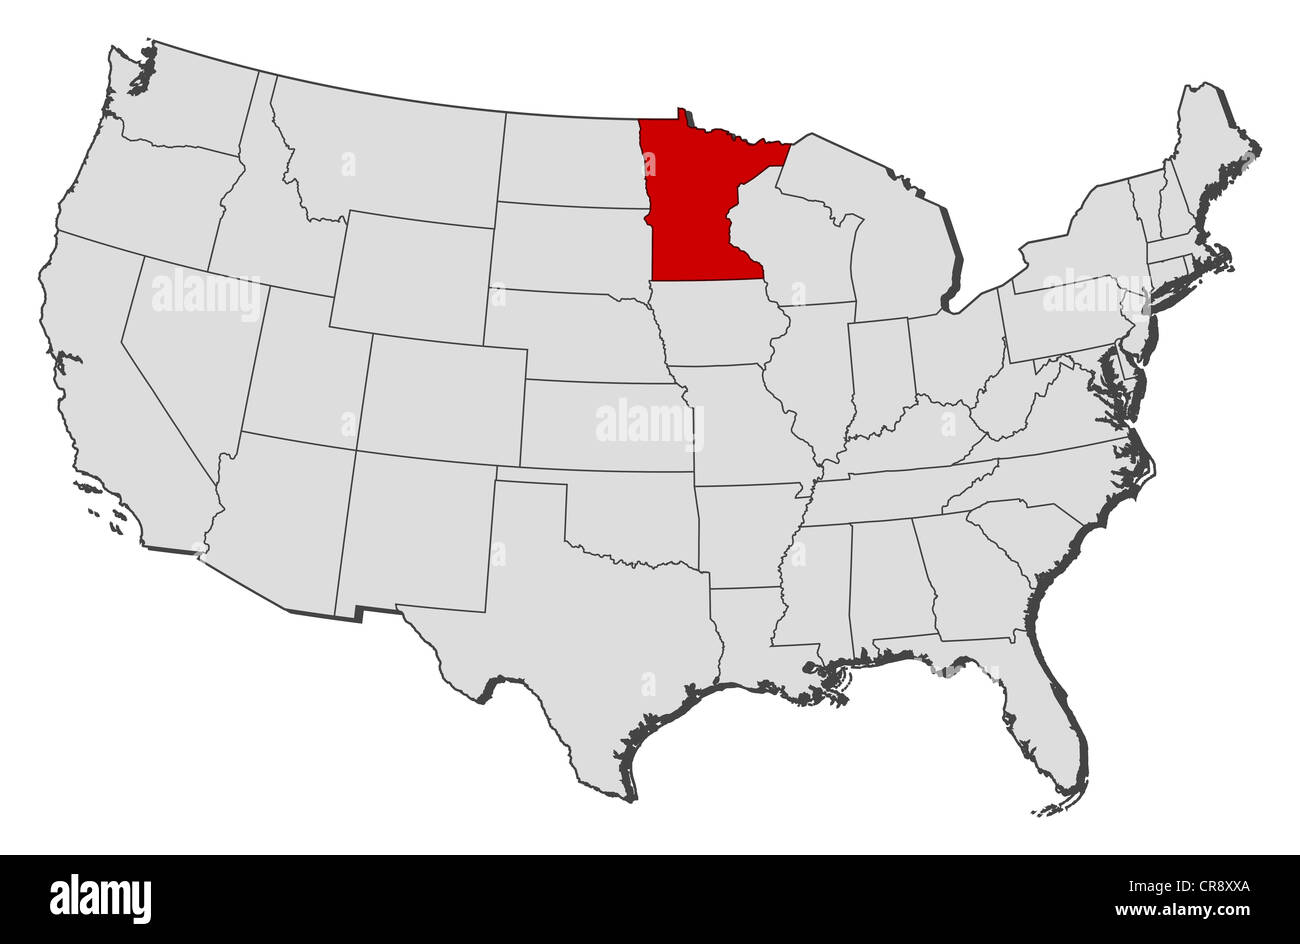 minnesota on us map Political Map Of United States With The Several States Where Stock minnesota on us map